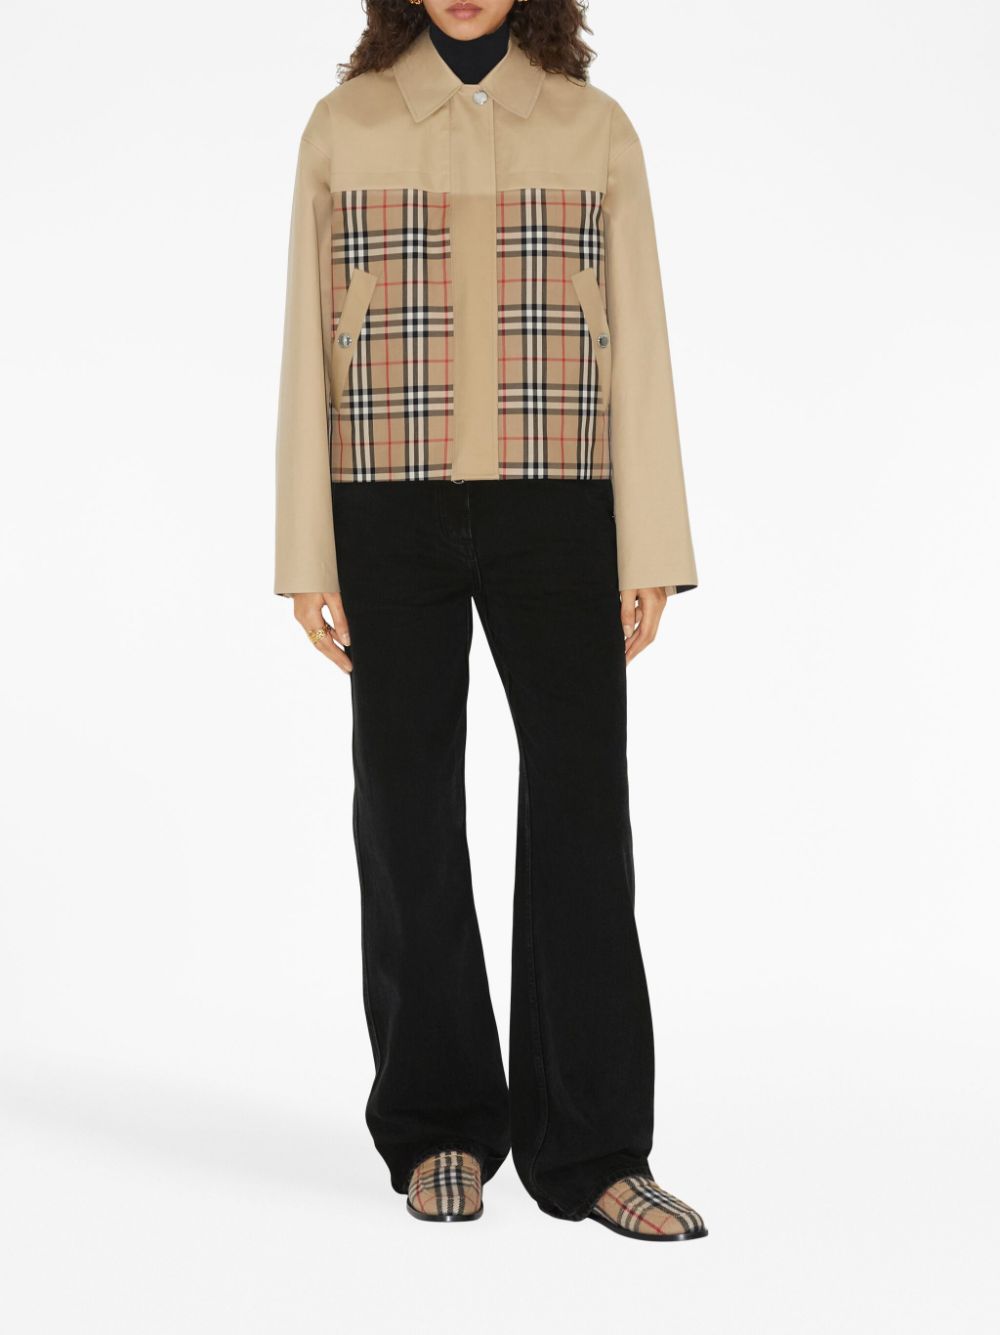 BURBERRY Beige Check Panel Cotton Jacket for Women